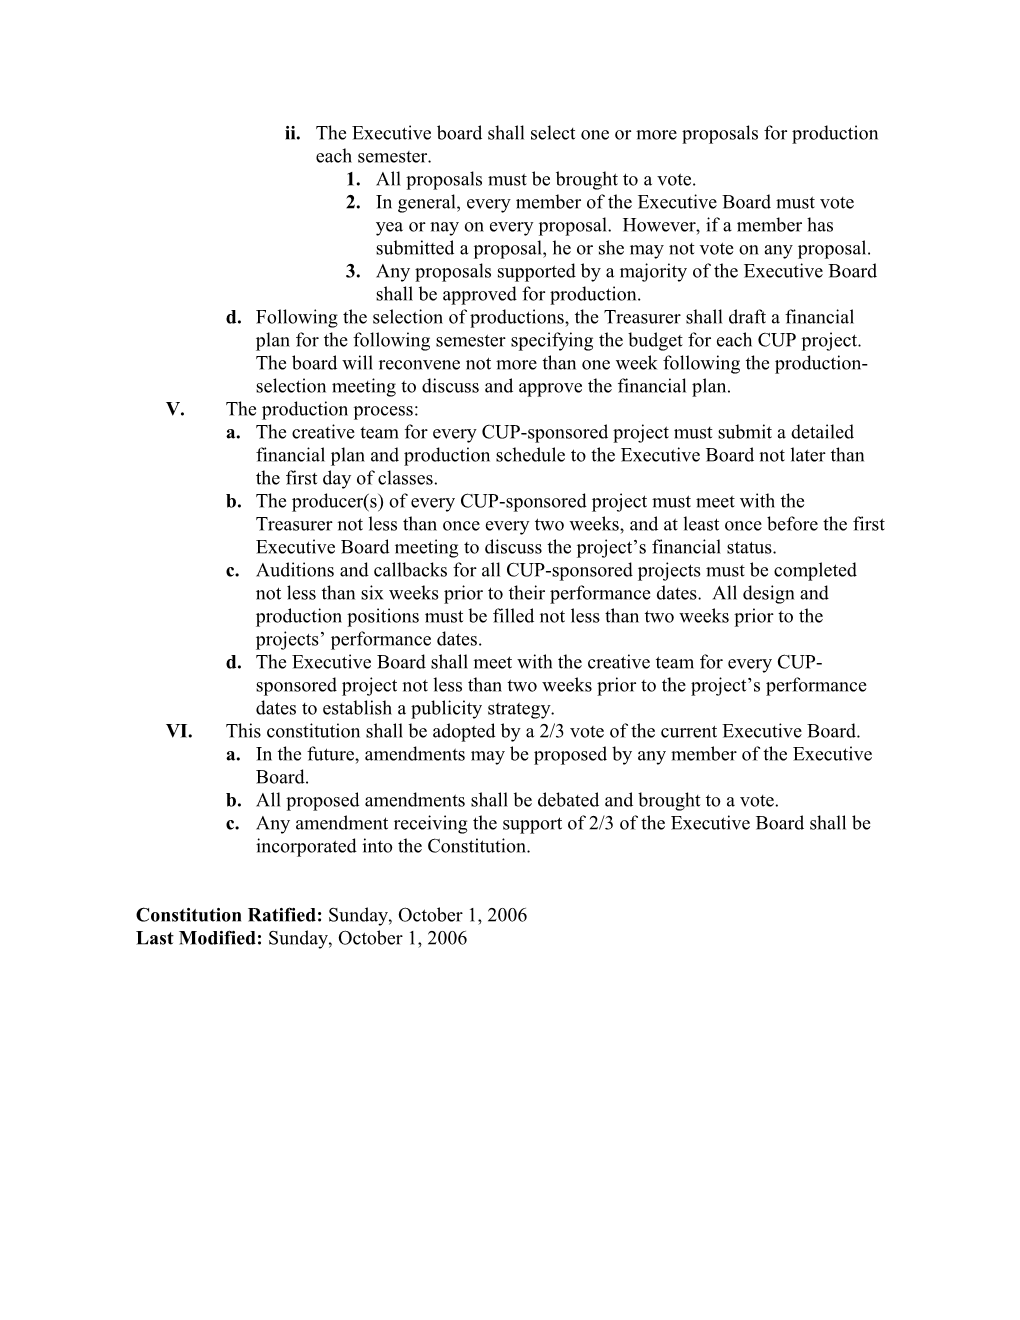 Constitution for the Columbia University Players (DRAFT)